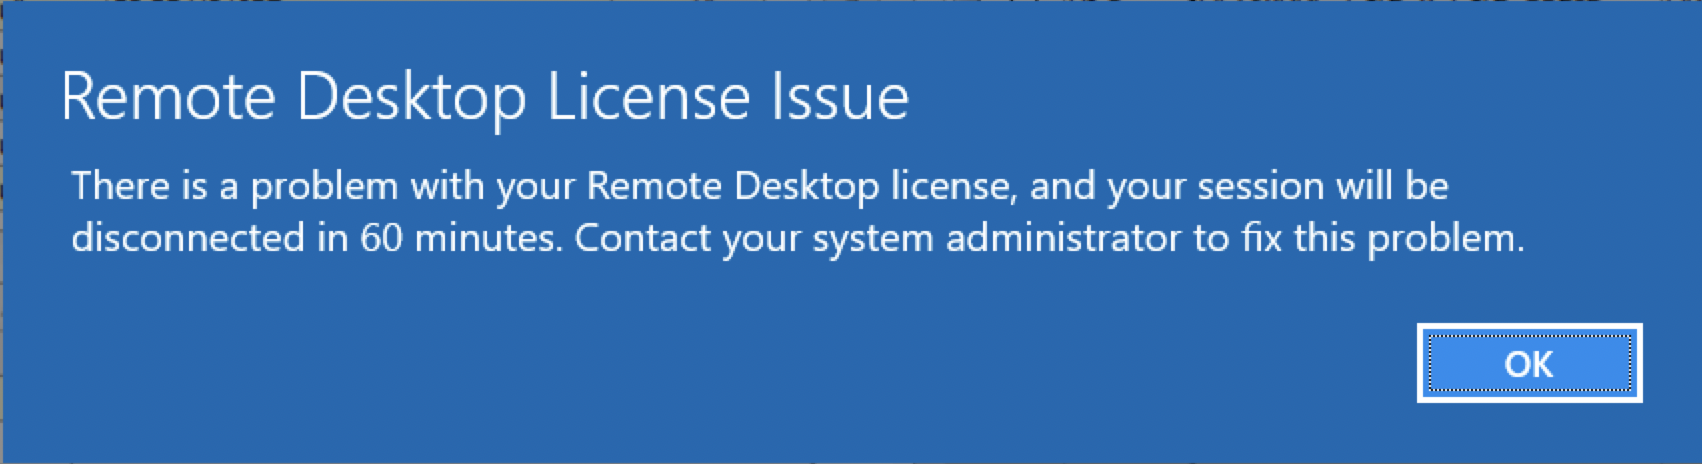 Remote Desktop License Issue (Disconnect in 60 minutes) 563d0bae-a2a5-46e4-b53f-595292427246?upload=true.png